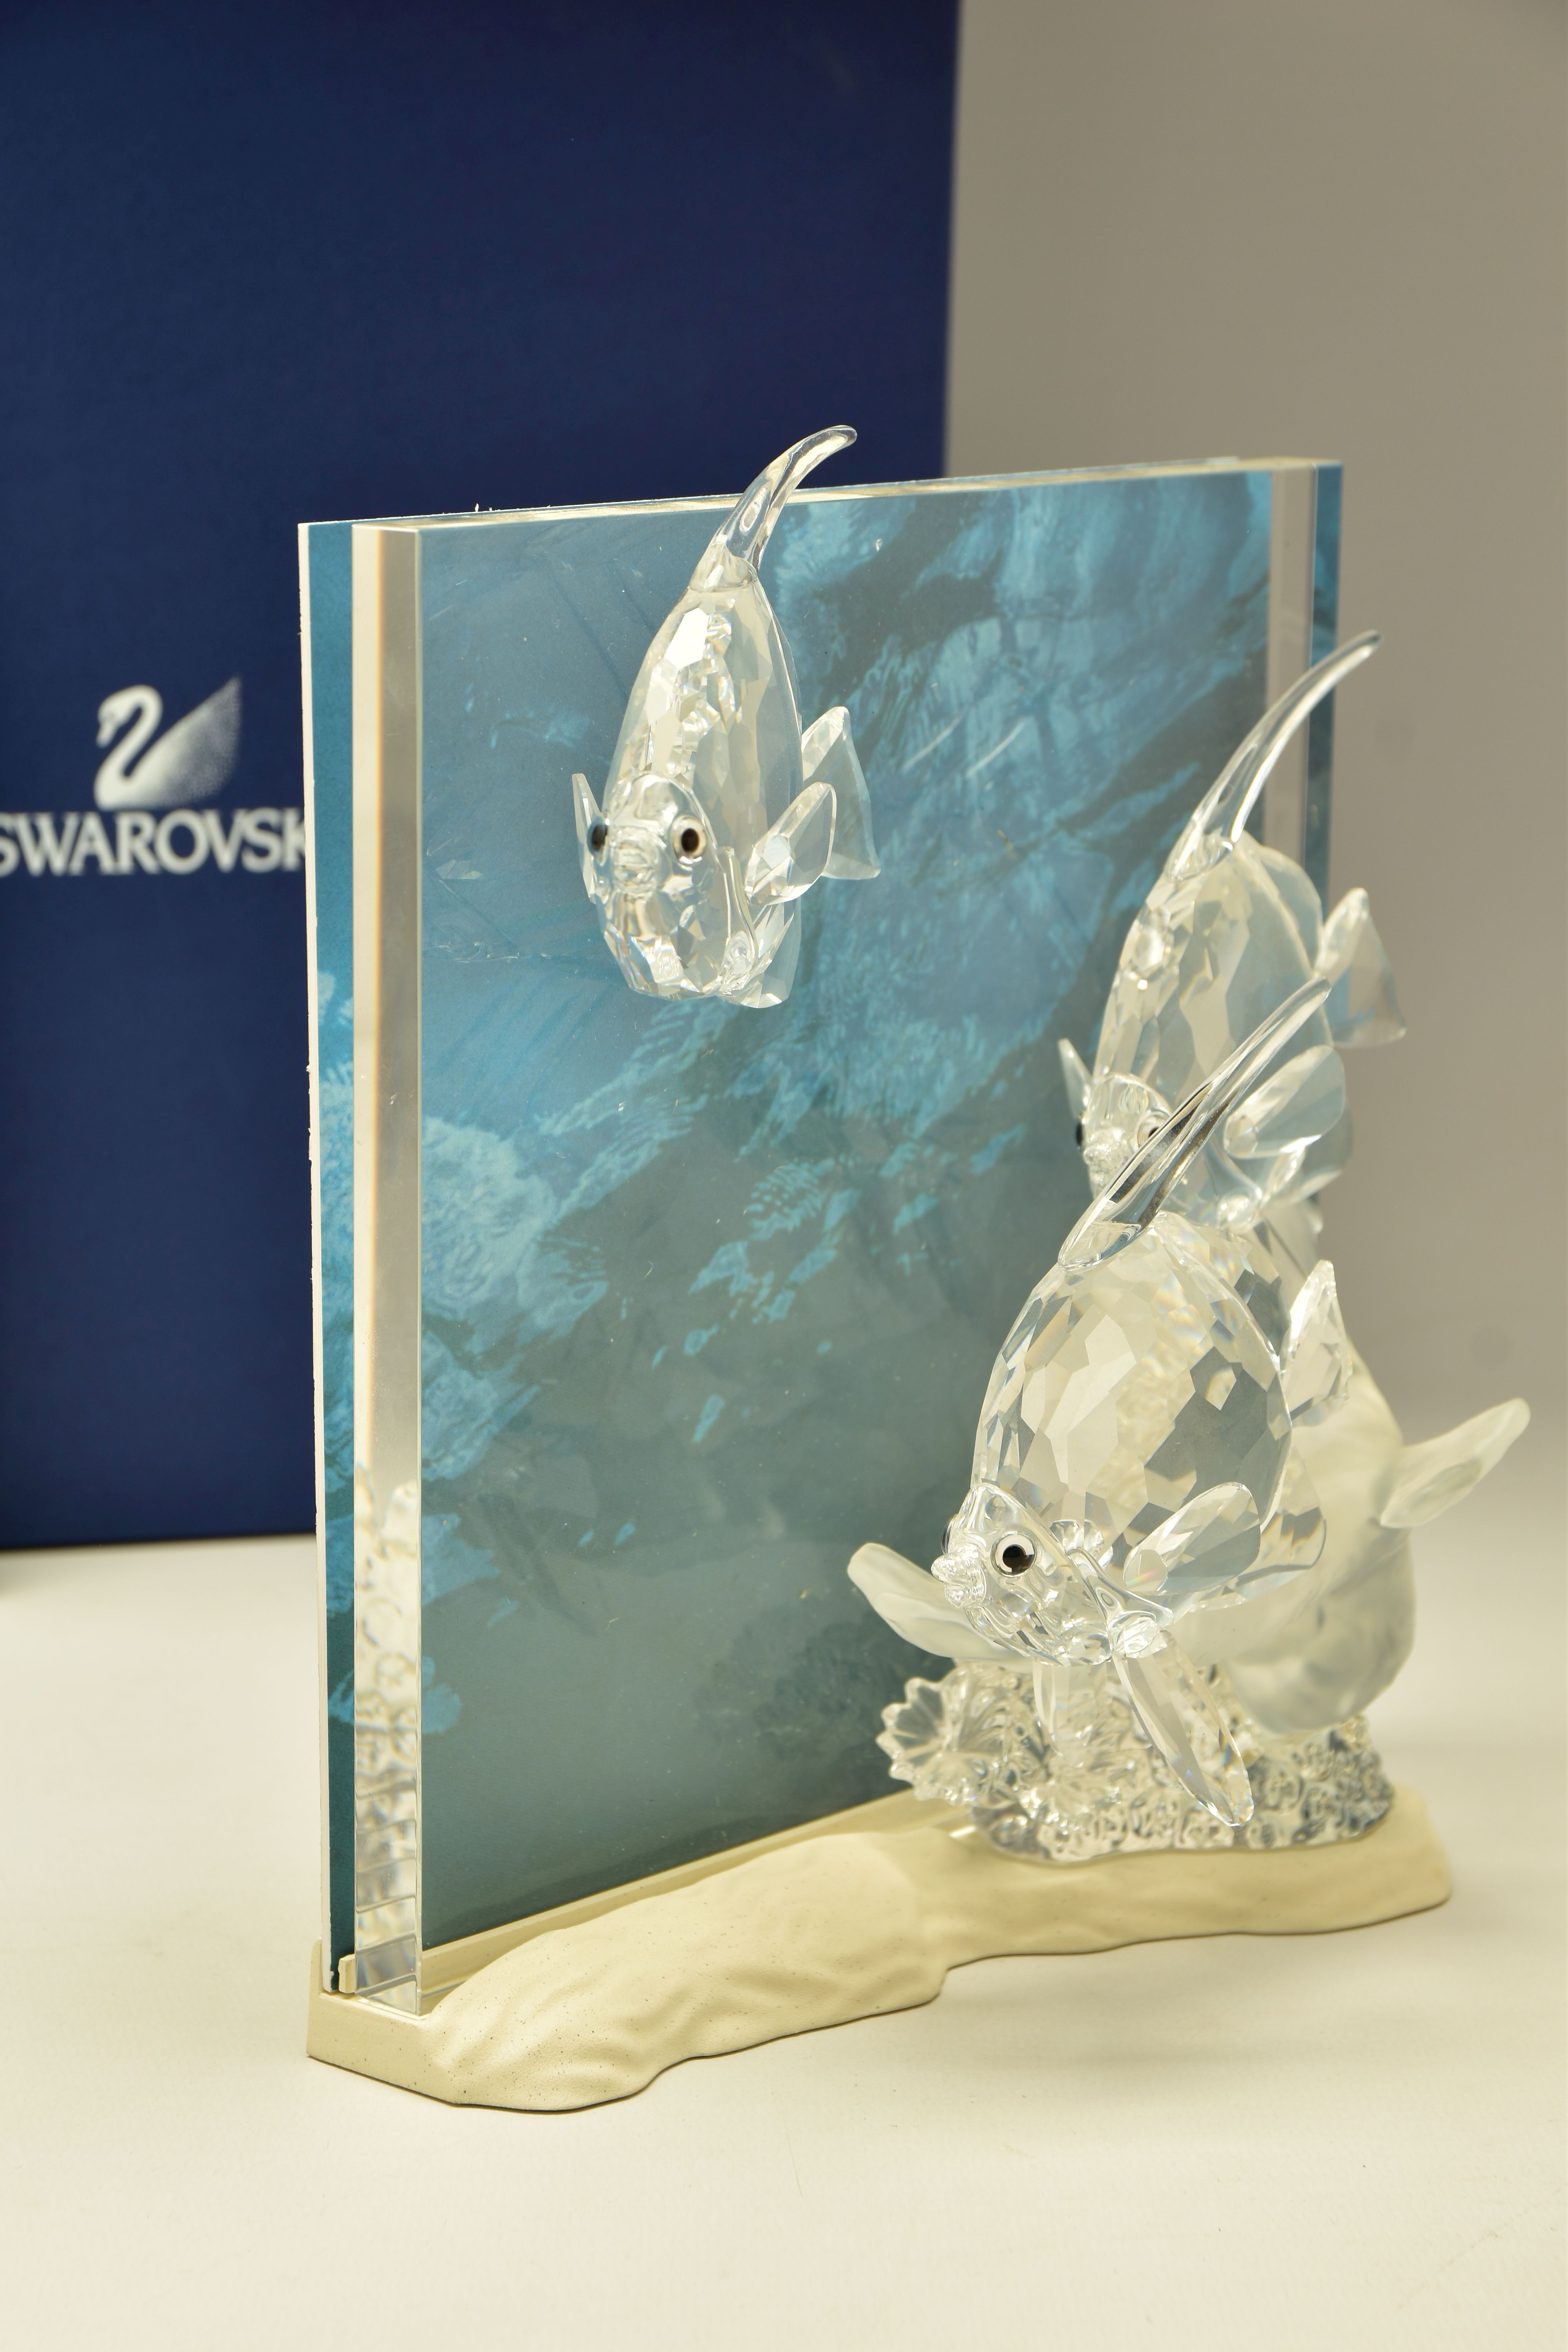 A BOXED SWAROVSKI CRYSTAL SOCIETY DIORAMA, THIRD PIECE OF THE TRILOGY WONDERS OF THE SEA - COMMUNITY - Image 4 of 6